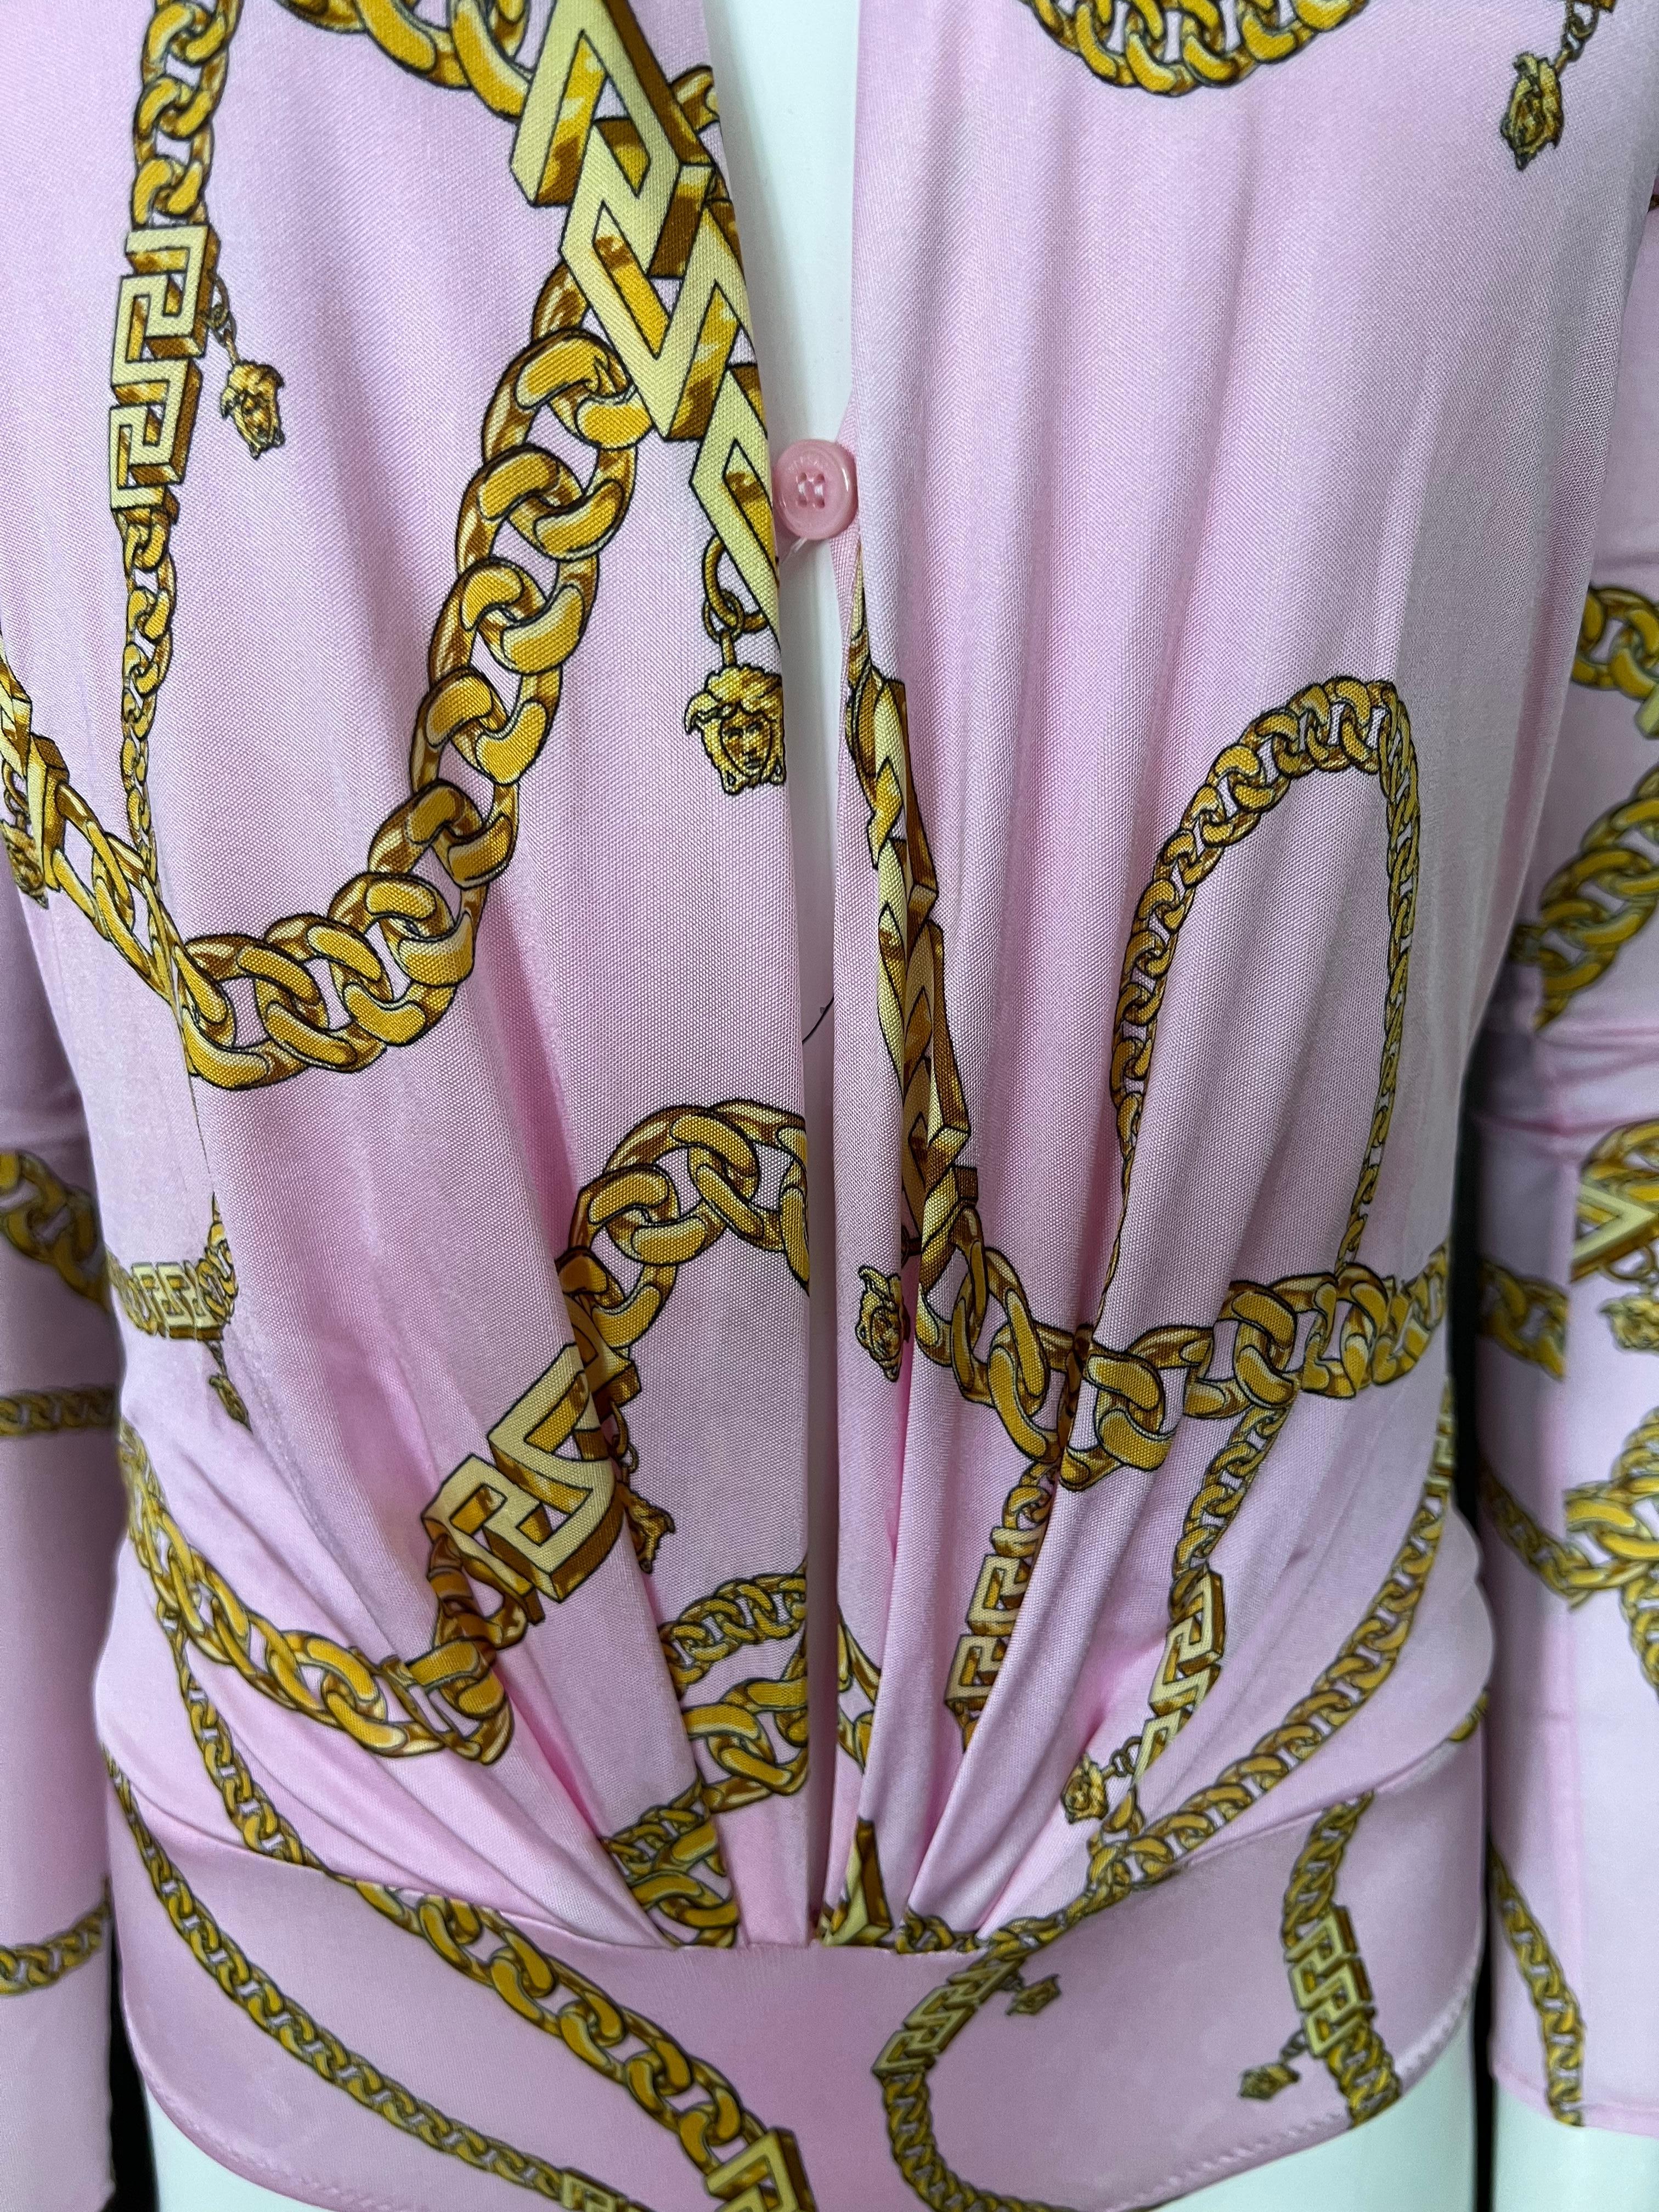 Versace Chain Long Sleeve Pink Bodysuit In Excellent Condition For Sale In Beverly Hills, CA